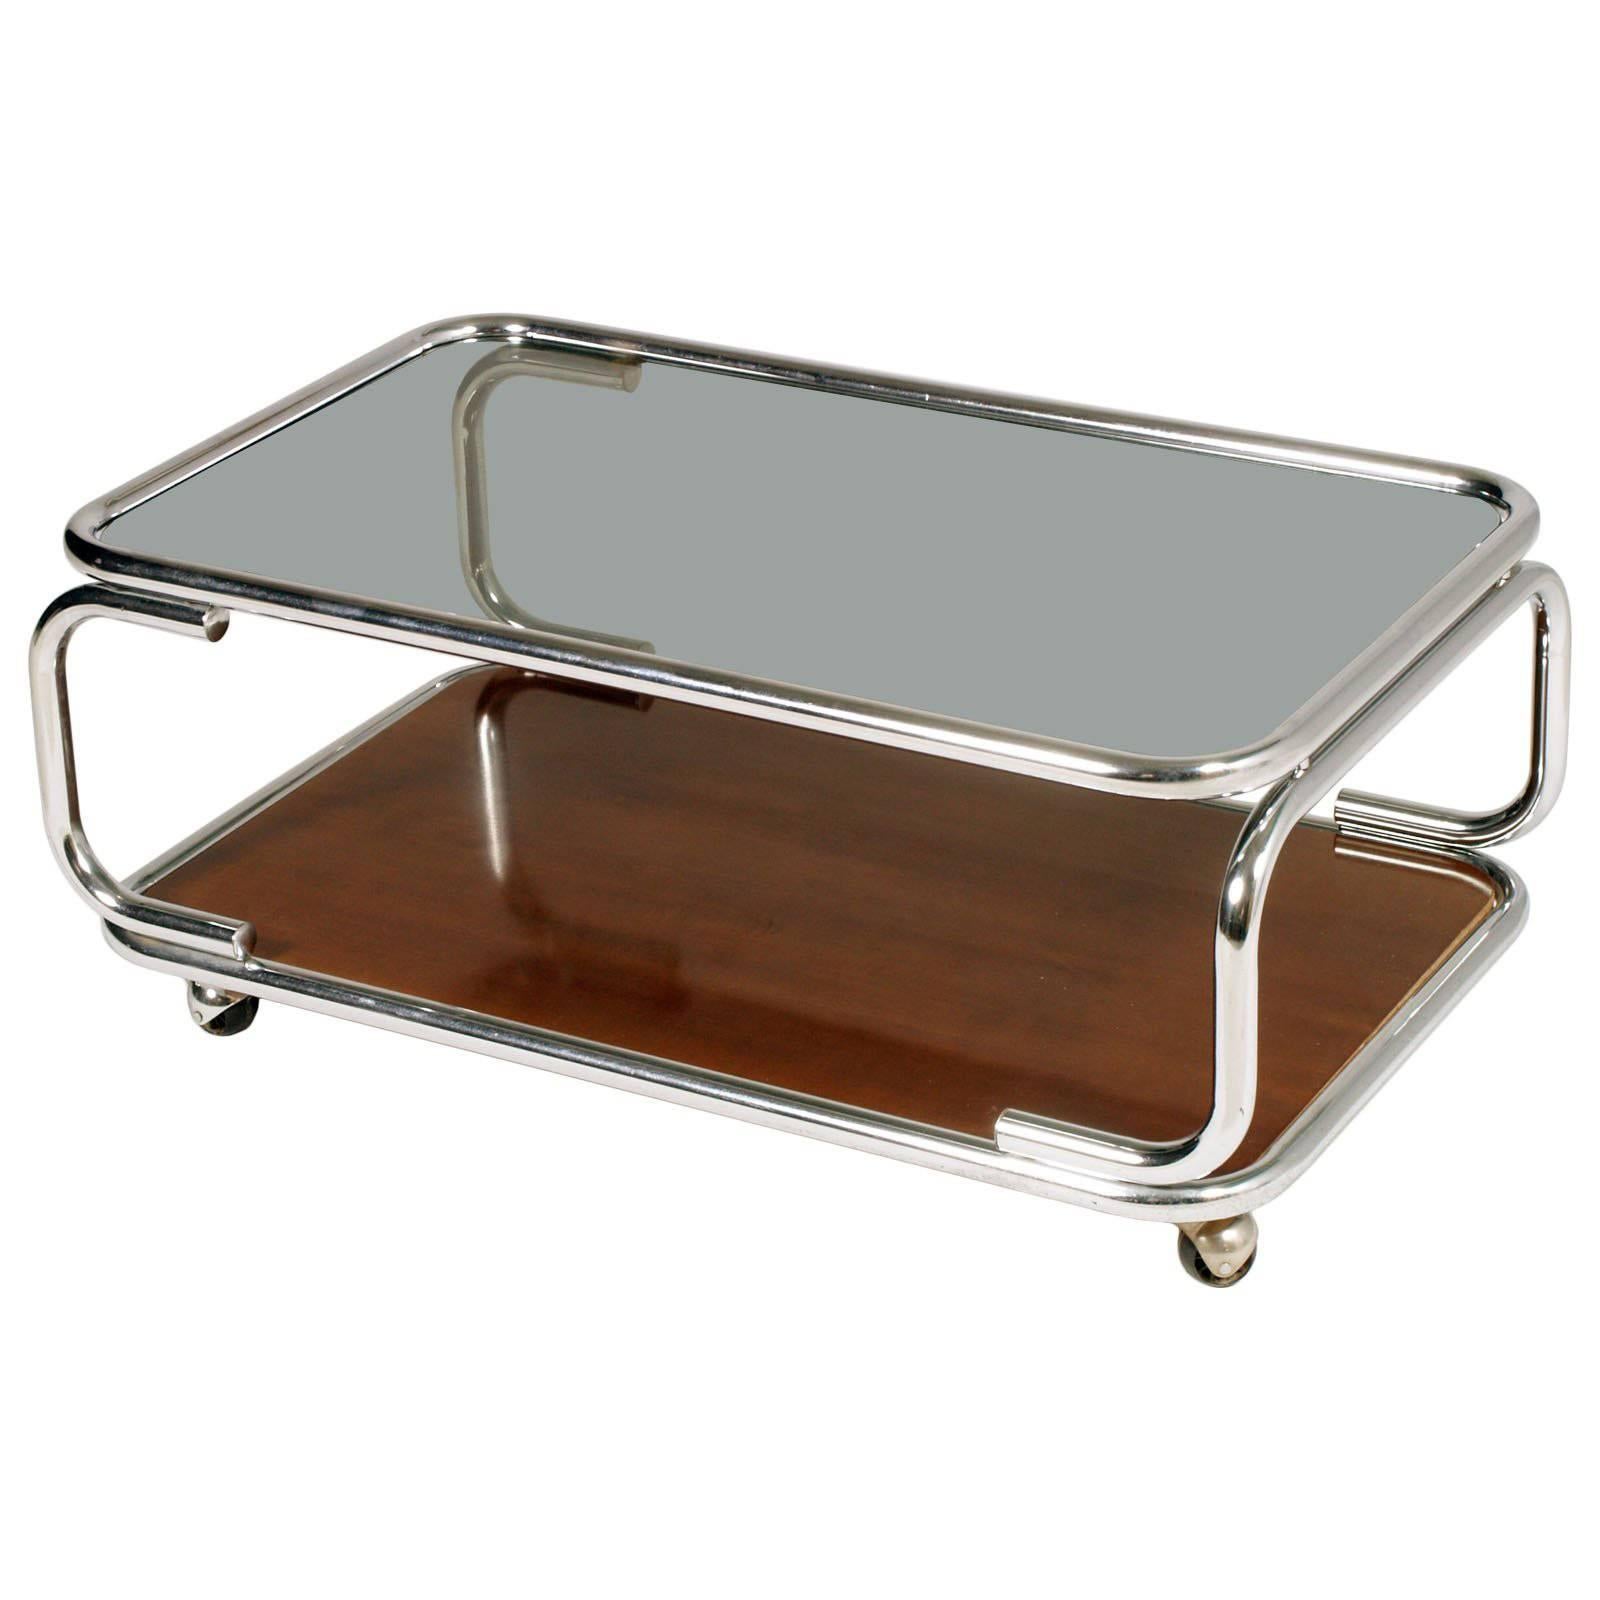 1960s Chrome Serving Trolley Coffee Table Smoked Glass Top & Faux Laminated Wood